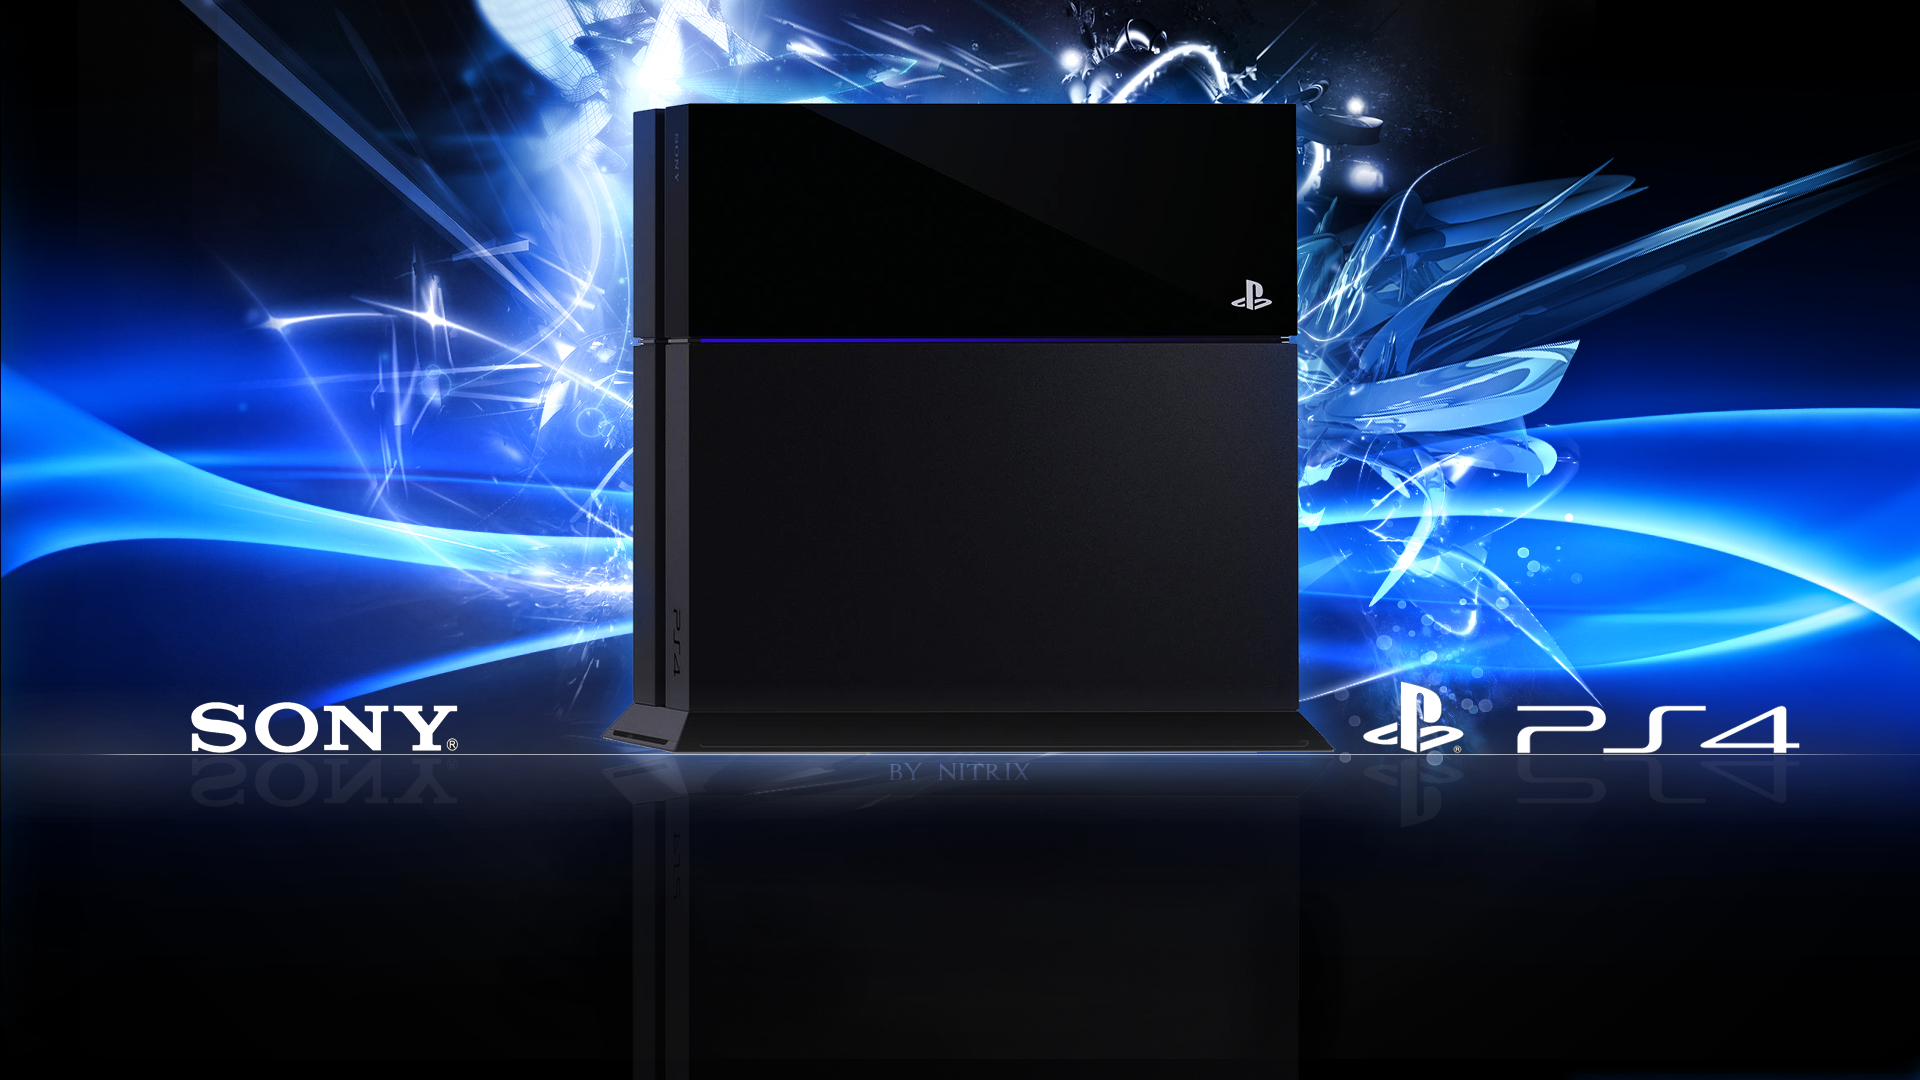 Abstract PS4 Wallpaper by nitr1x Abstract PS4 Wallpaper by nitr1x